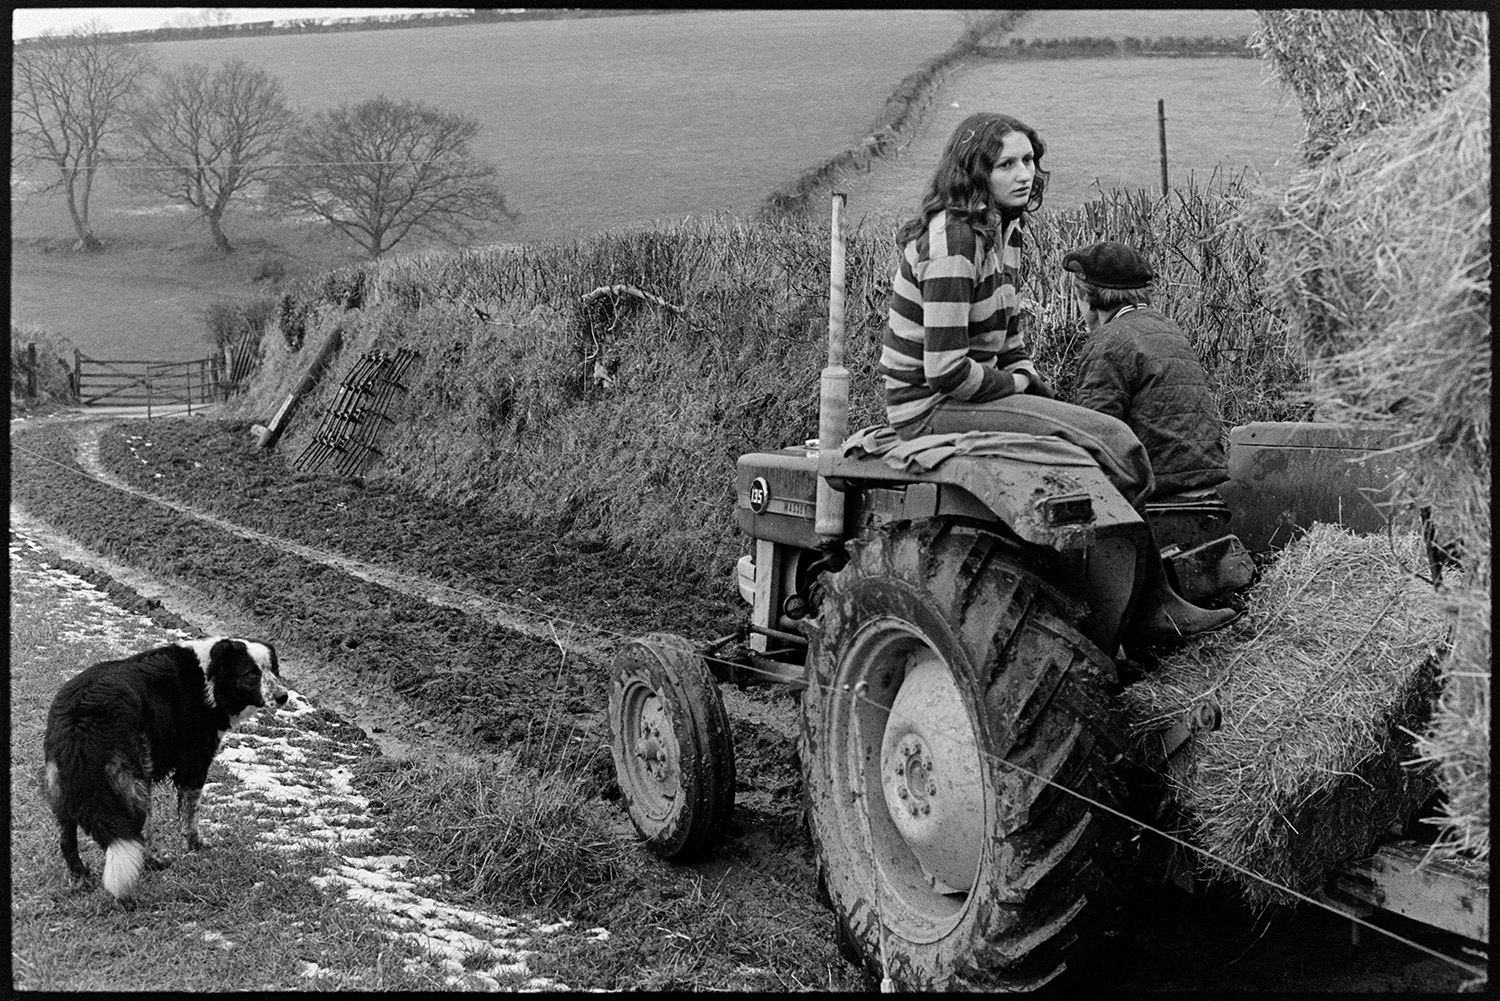 Farmer and daughter taking hay back to farm with tractor and trailer. 
[Ivor Bourne and his daughter, Marylin Bourne, driving a tractor and trailer with hay bales along the edge of a field back to the farmyard at Jeffrys, Beaford, also known as Mill Road Farm. They are accompanied by a dog. Patches of snow can be seen in the field by the muddy track and a harrow is resting against the hedge in the background.]